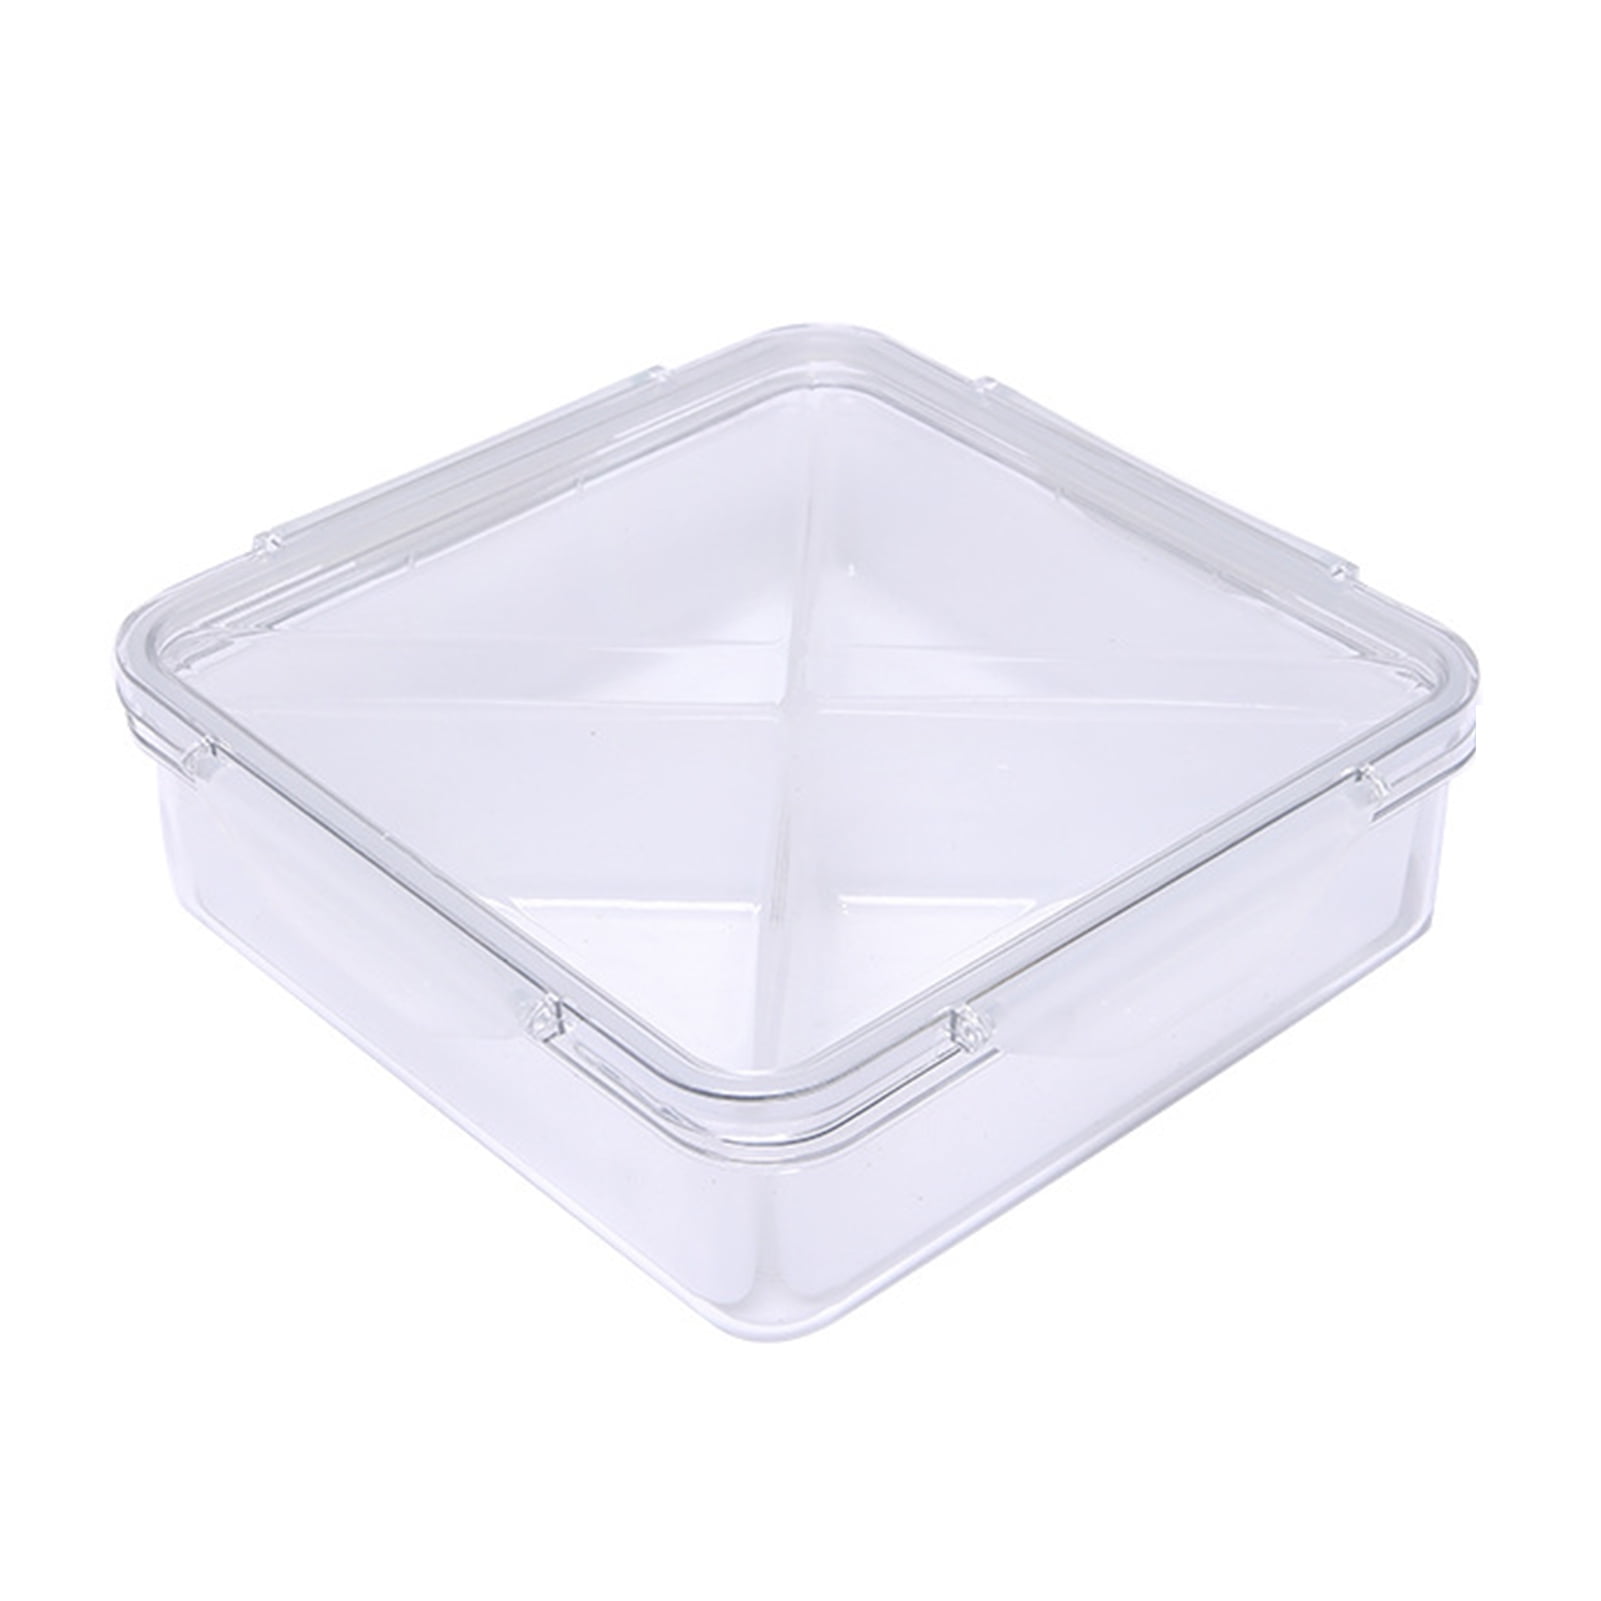 Yasu Fruit Tray with Compartments Airtight Food Storage Container Fruit Tray with Lid 4/6 Compartments Divided Snack Box Container, Size: Round